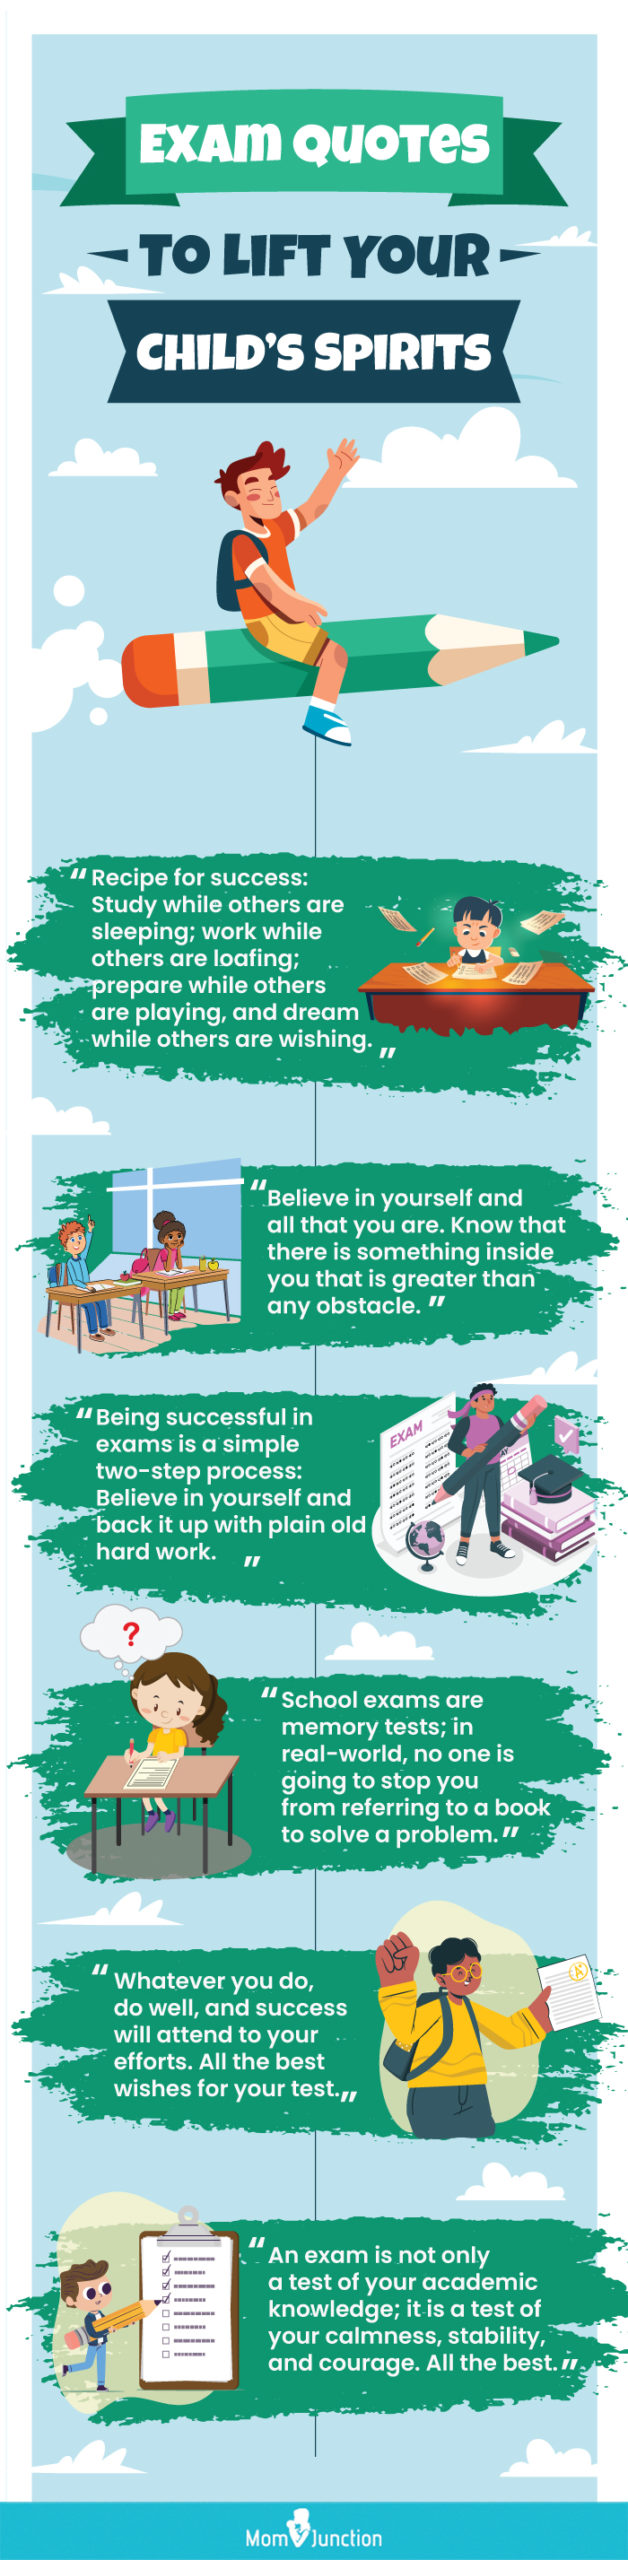 exam quotes to lift your child’s spirits [infographic]